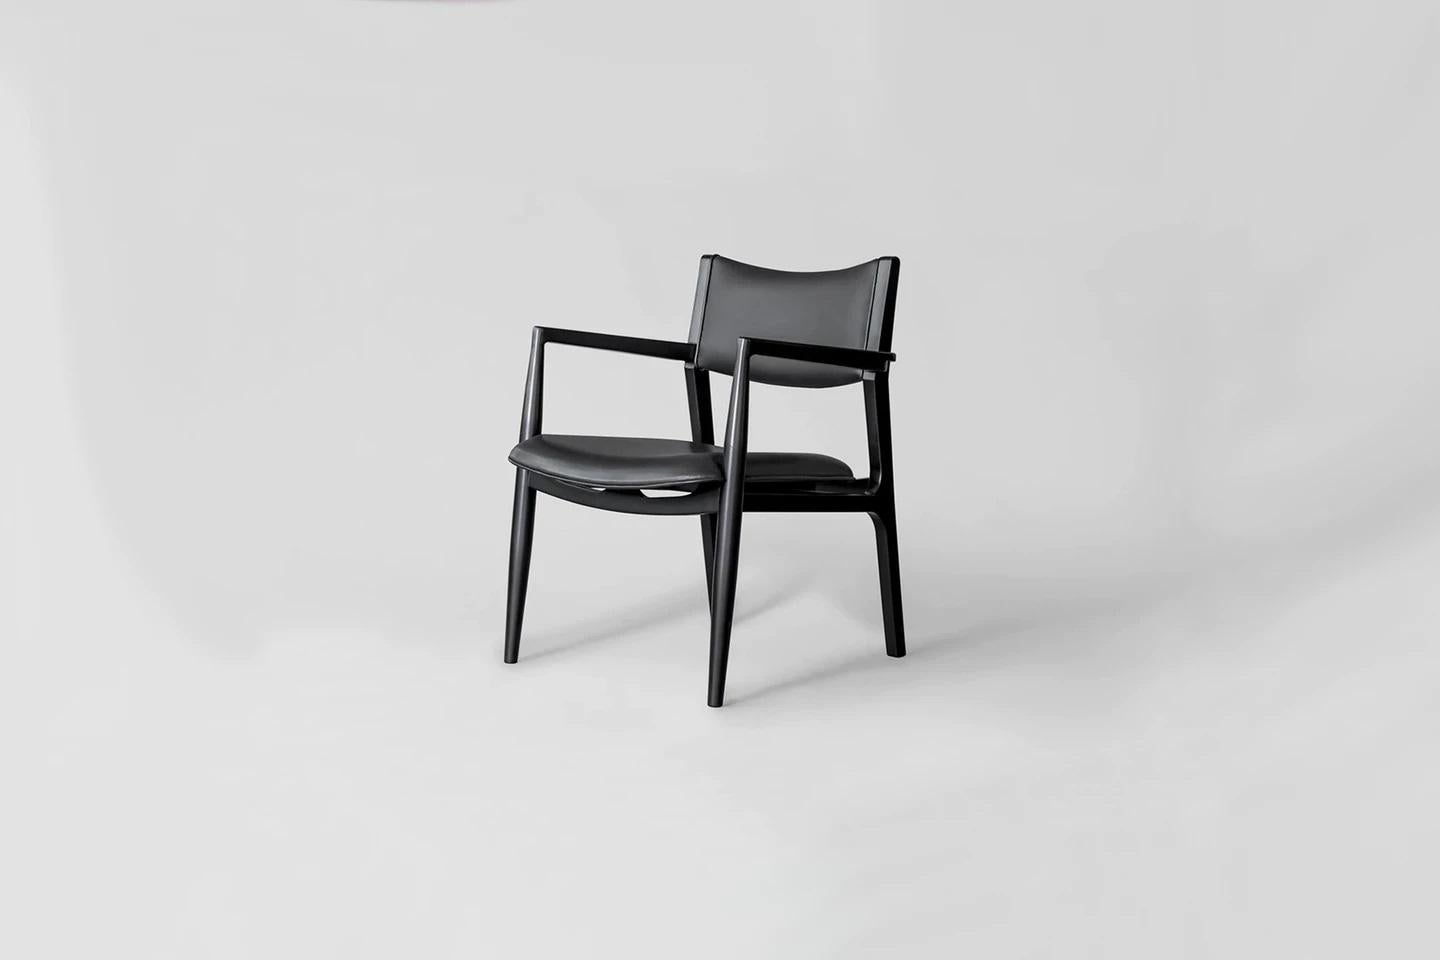 Olimpica dining chair by Atra Design
Dimensions: D 58.5 x W 65 x H 80.5 cm
Materials: Elmosoft leather, charcoal oiled mahogany.

Atra Design
We are Atra, a furniture brand produced by Atra form a mexico city–based high end production facility that